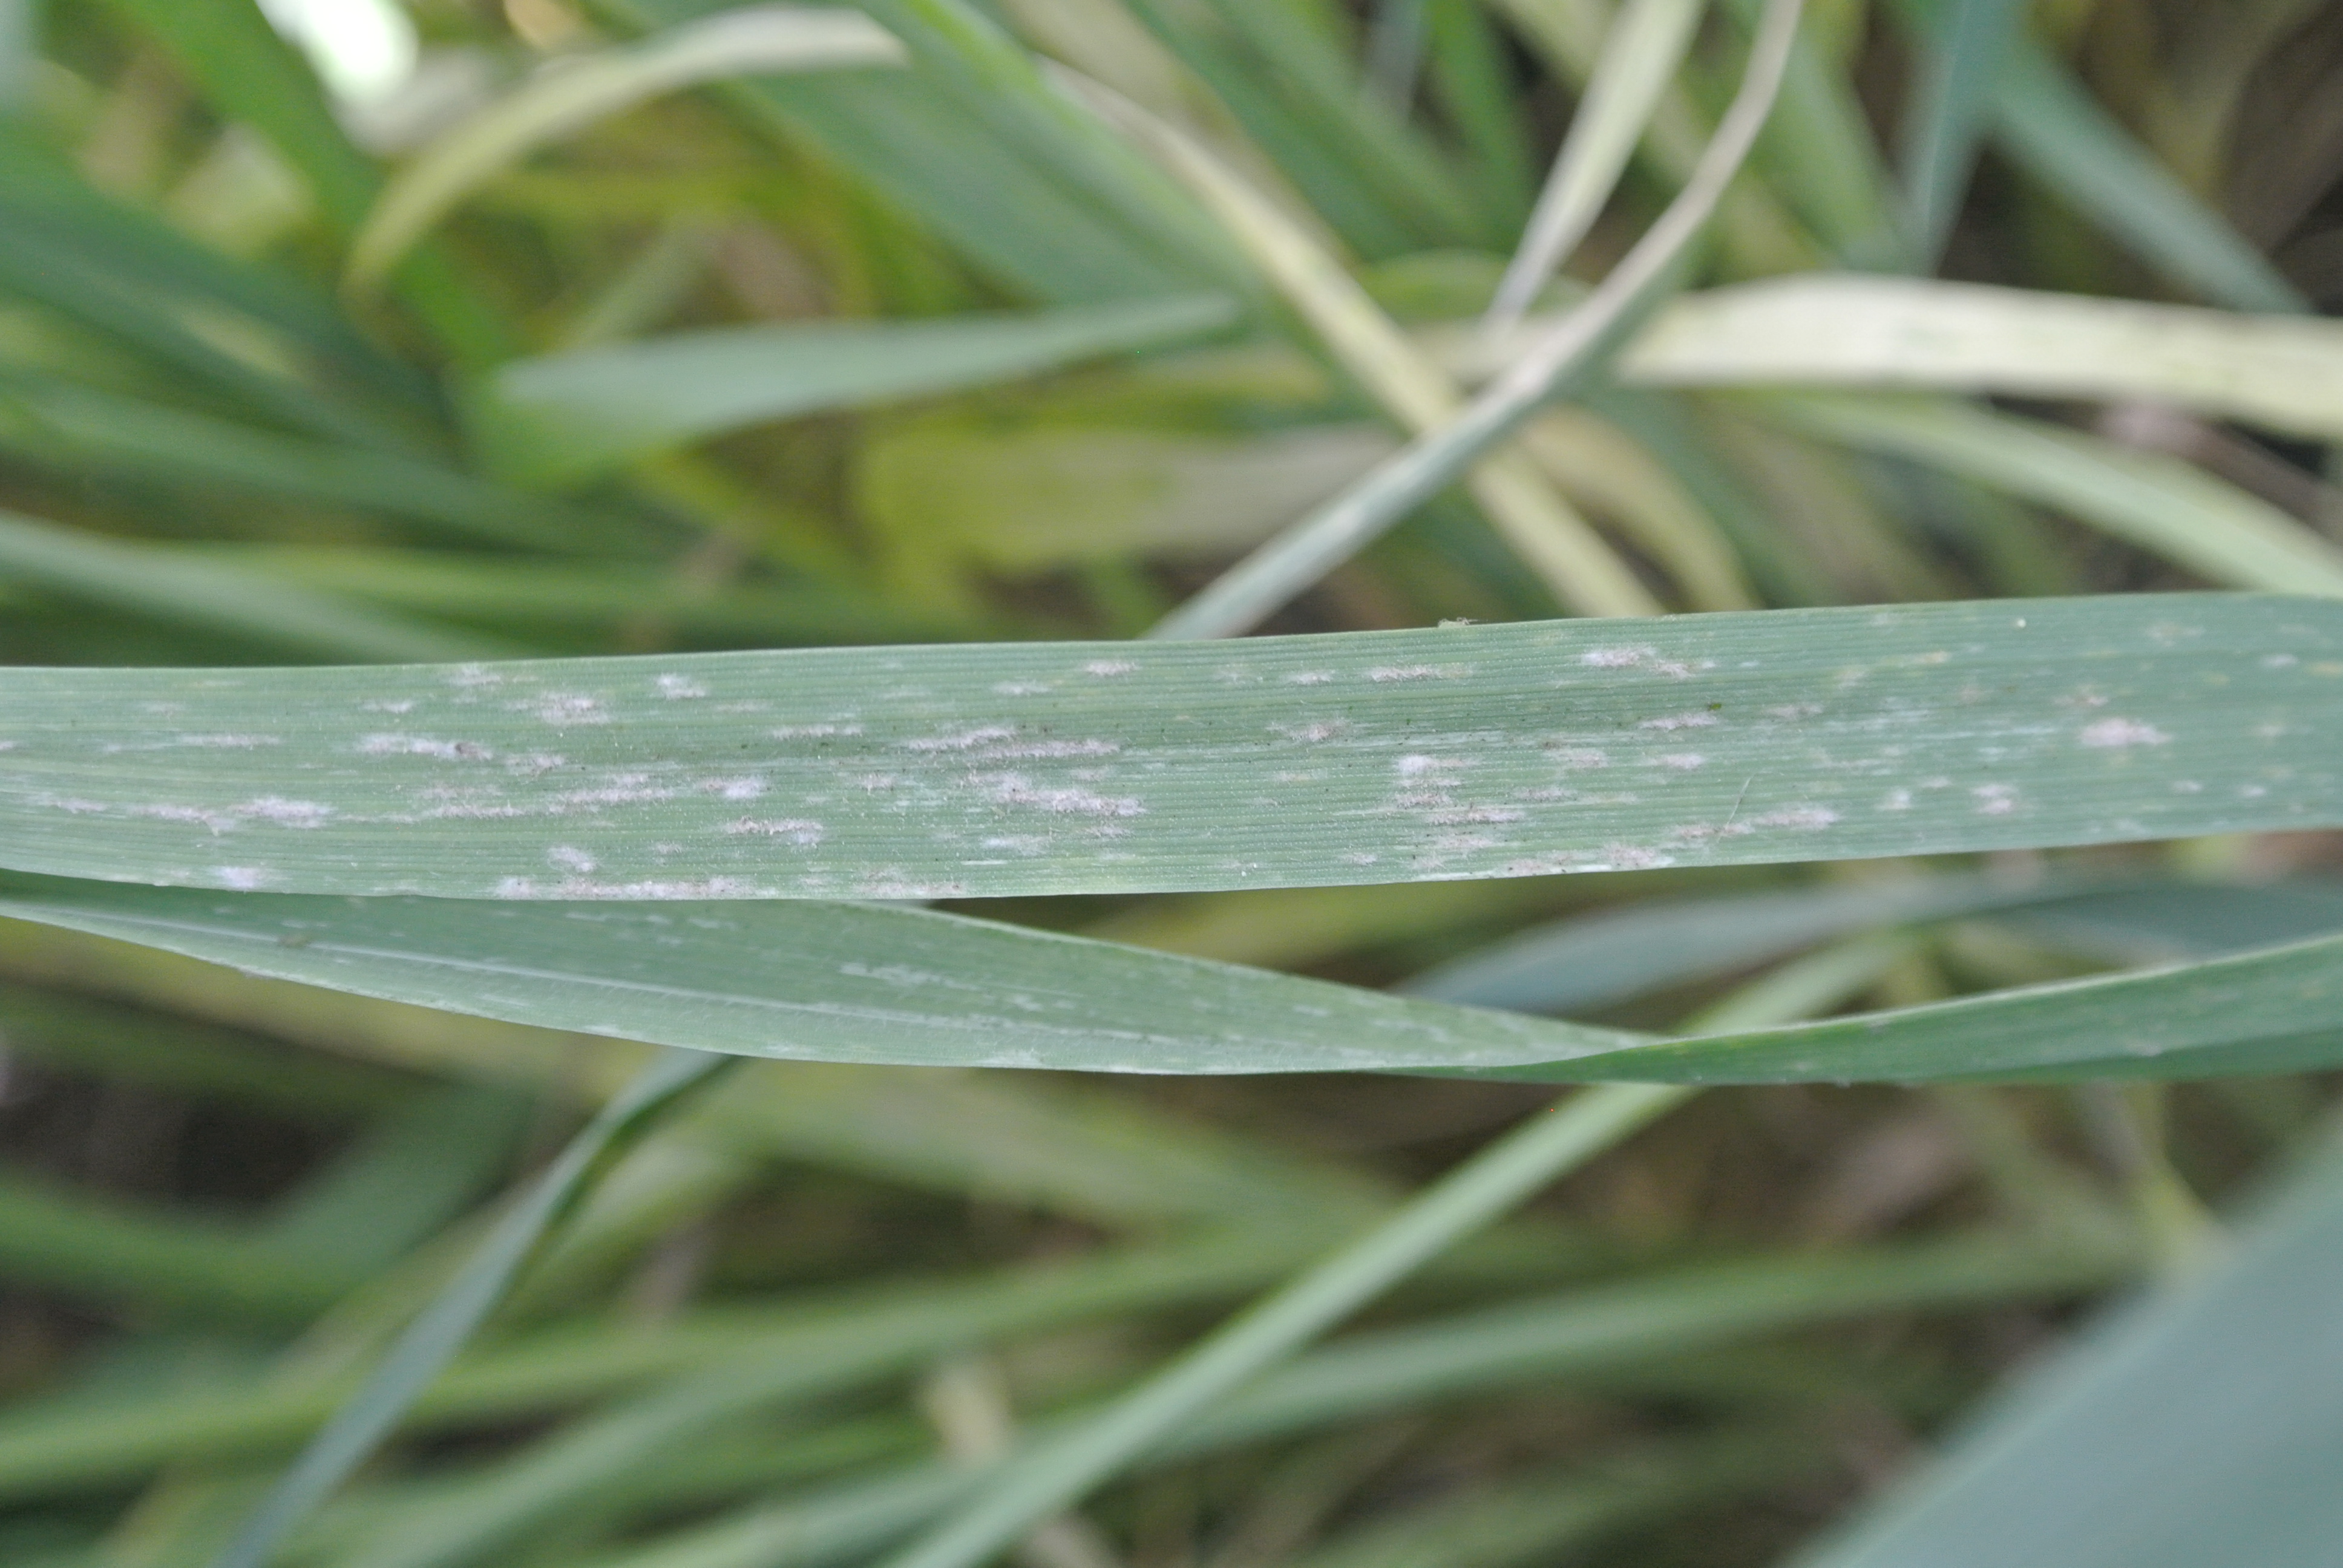 Fluffy, white to gray fungal growth on the top of leaves is characteristic of powdery mildew.